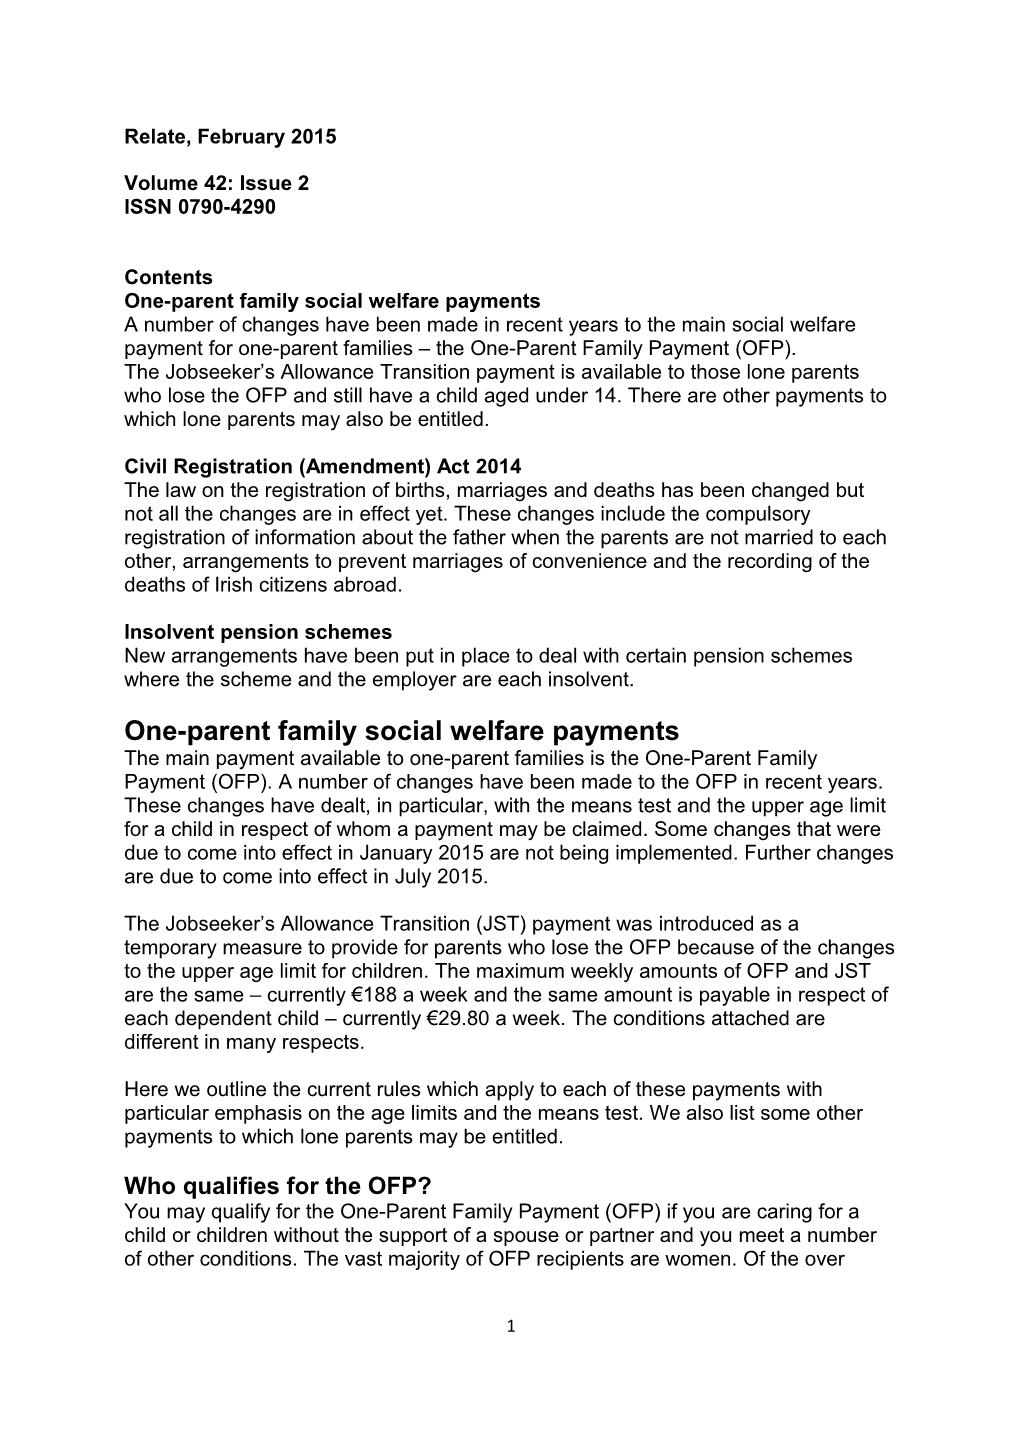 One-Parent Family Social Welfare Payments